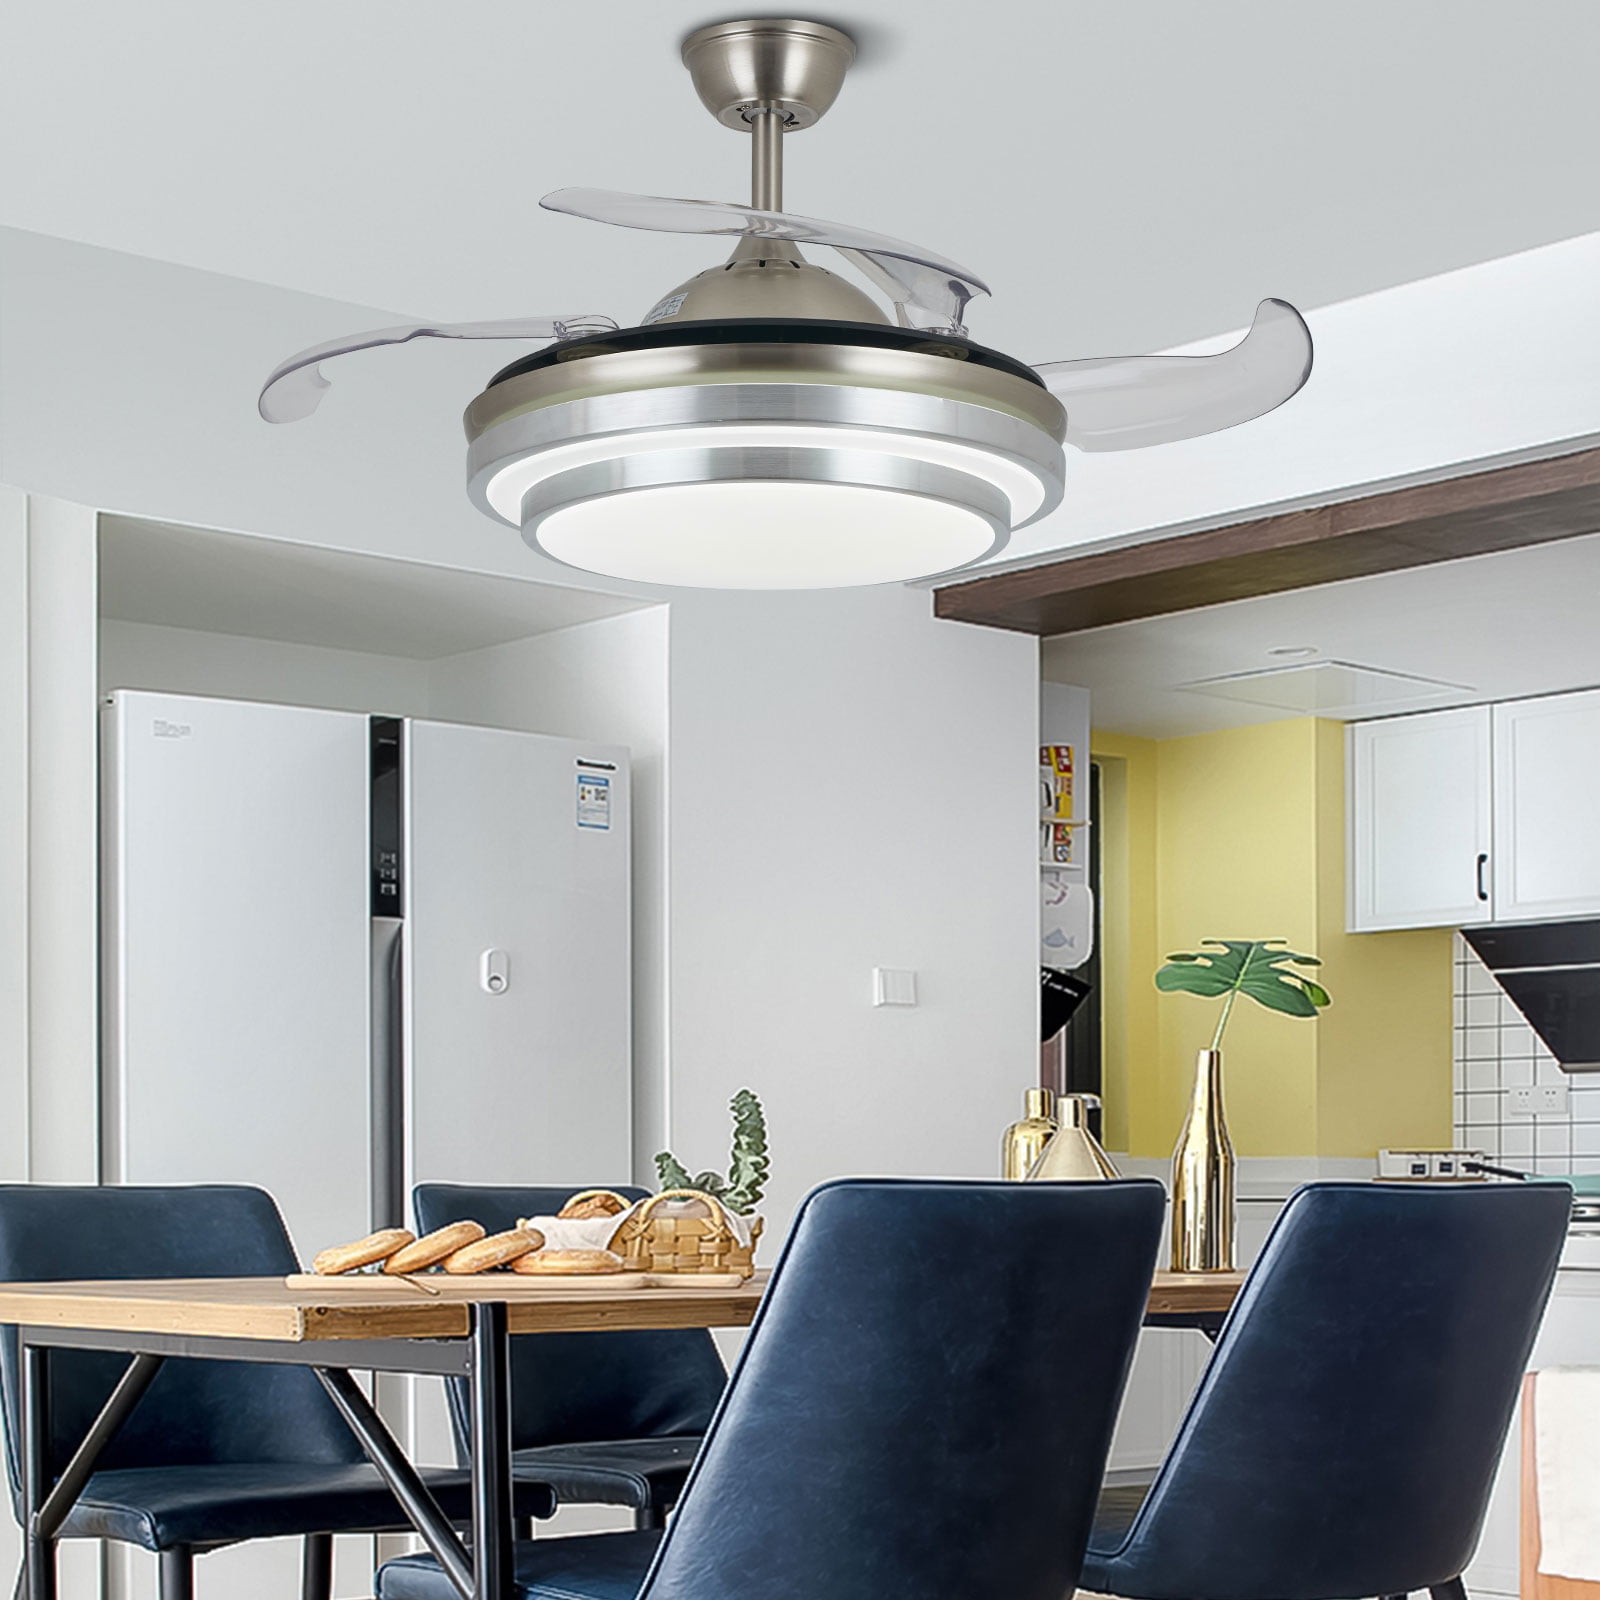 Details about   42" Retractable Ceiling Fan Lamp w/ Light Remote Control Dimmable LED Chandelier 